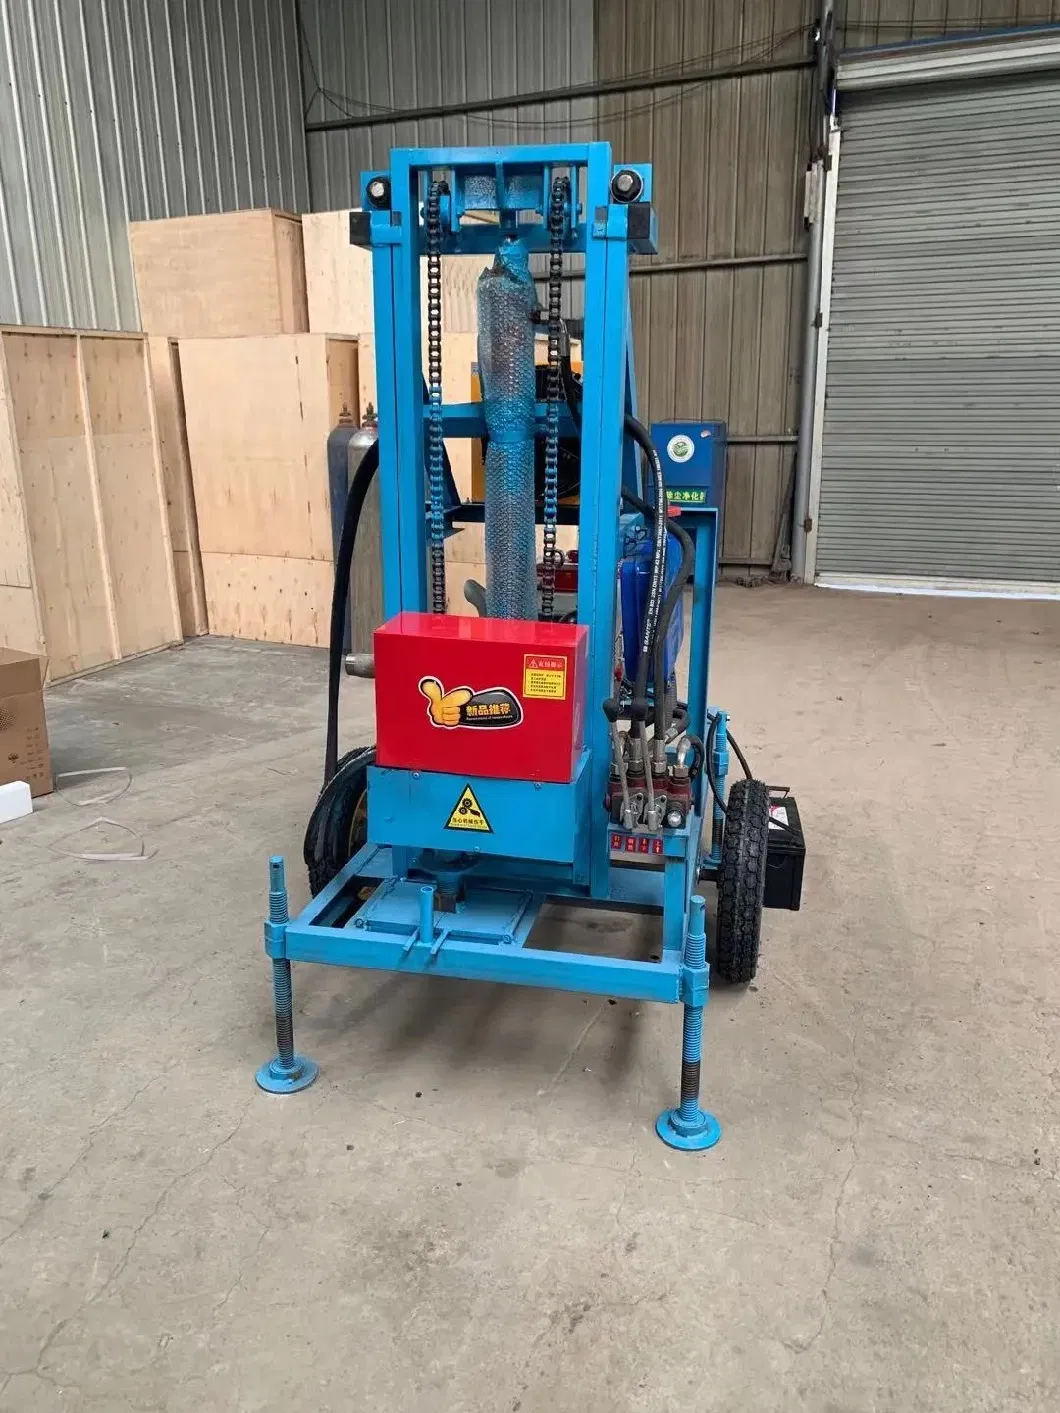 Hiyoung Easy Operation Hydraulic Drilling Machine Small Water Well Drilling Rig Machine